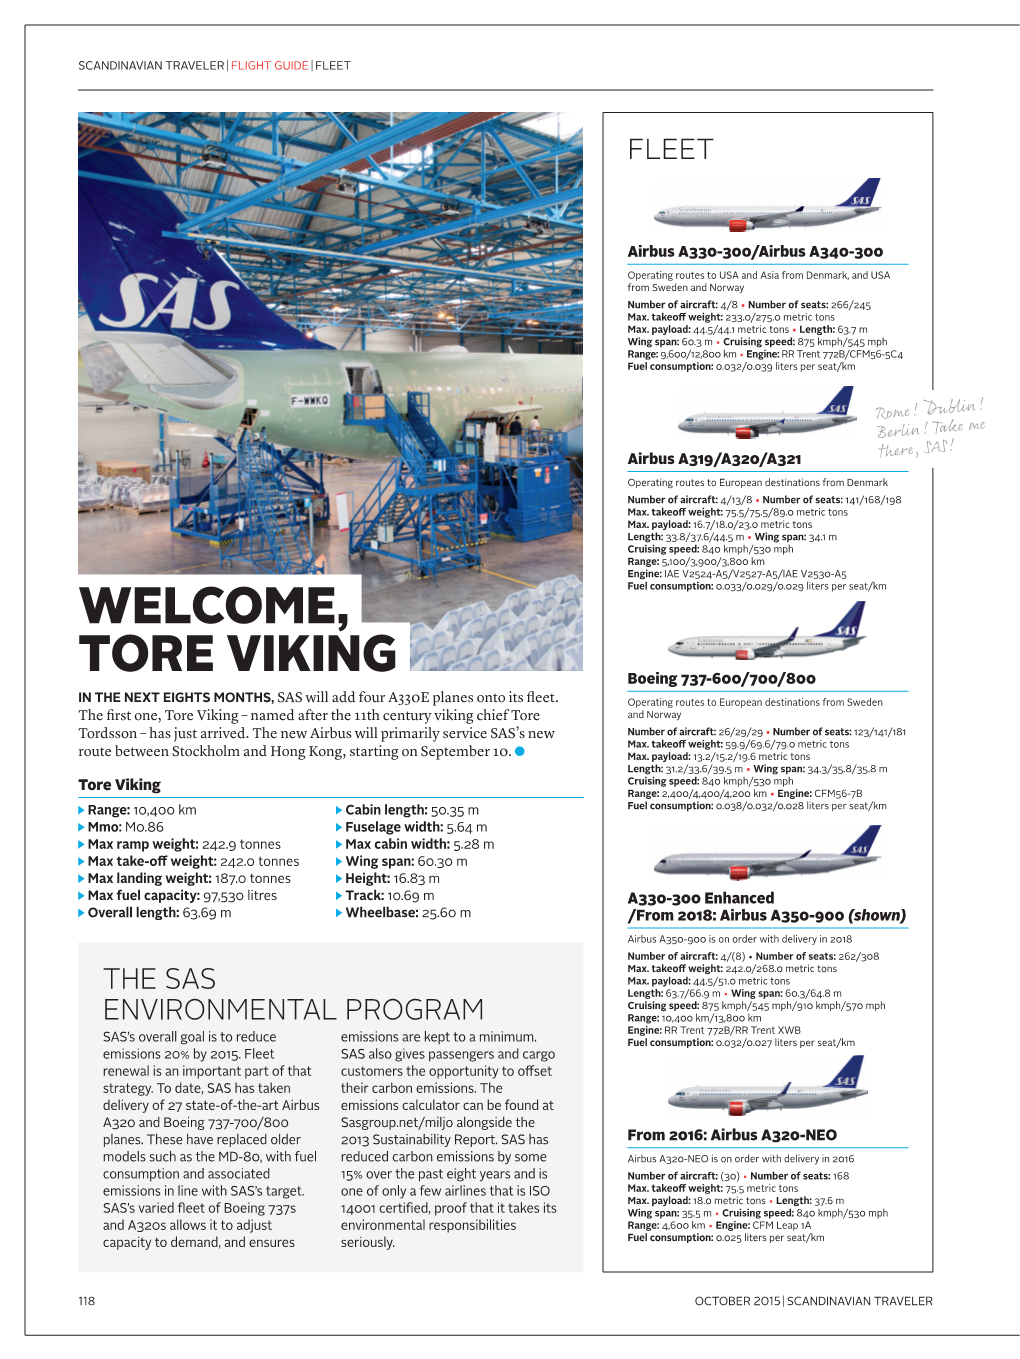 TORE VIKING Boeing 737-600/700/800 in the NEXT EIGHTS MONTHS, SAS Will Add Four A330E Planes Onto Its Fleet